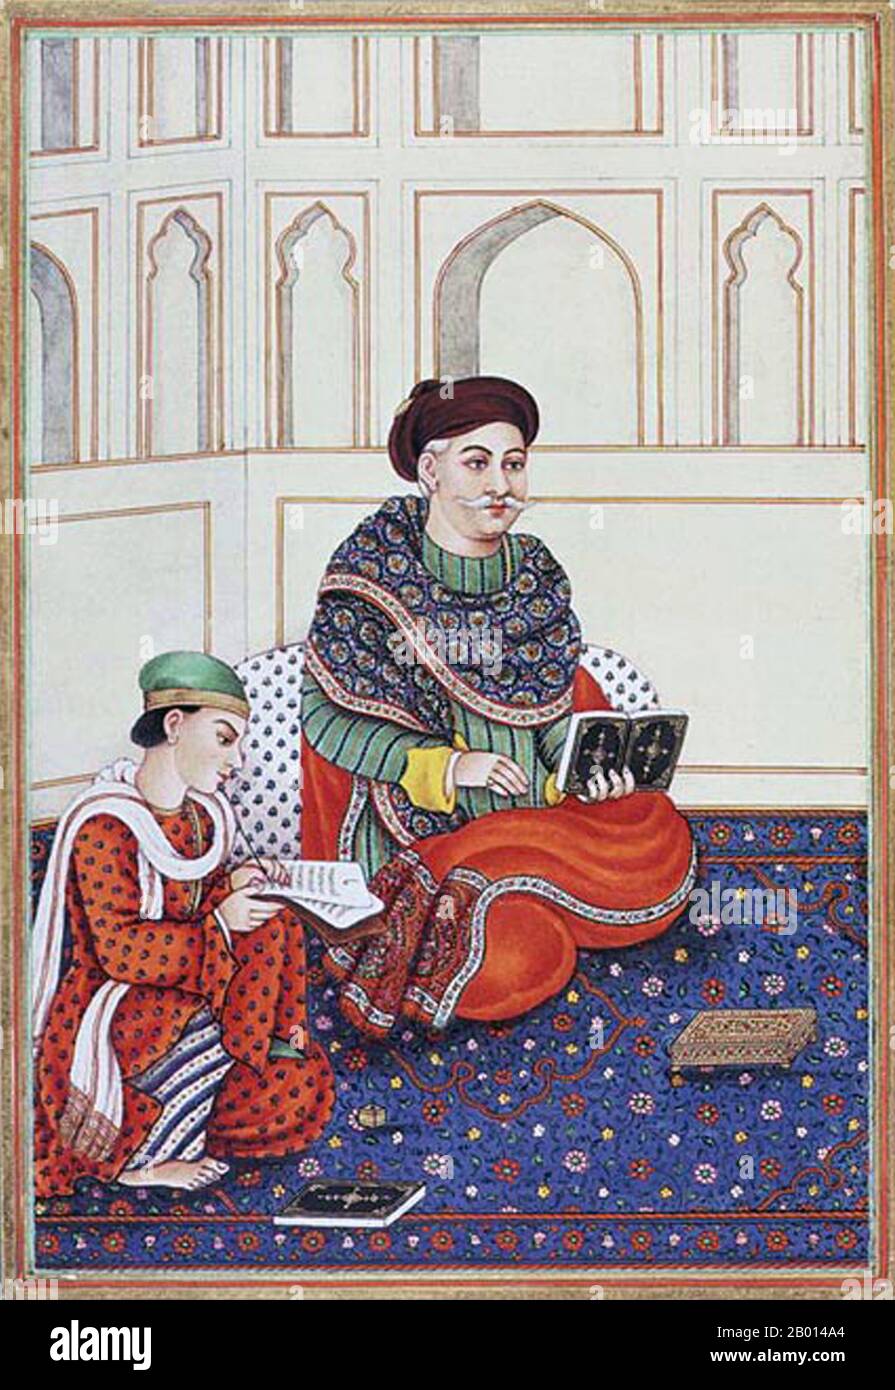 India: 'A Khattri Nobleman'. Miniature painting from 'Kitab-I Tasrih Al-Aqvam (History of the Origin and Distinguishing Marks of the Different Castes of India' by Colonel James Skinner/Sikandar Sahib (1778-1841), early 19th century.  The Khatri is a caste found mostly in the Punjab region of Northern India and Pakistan. Katris were historically accountants,bankers, civil administrators, merchants, scribes, traders and teachers. They are an integral part of the old Kshatriya caste, second only to Brahmans in the social hierarchy. Stock Photo